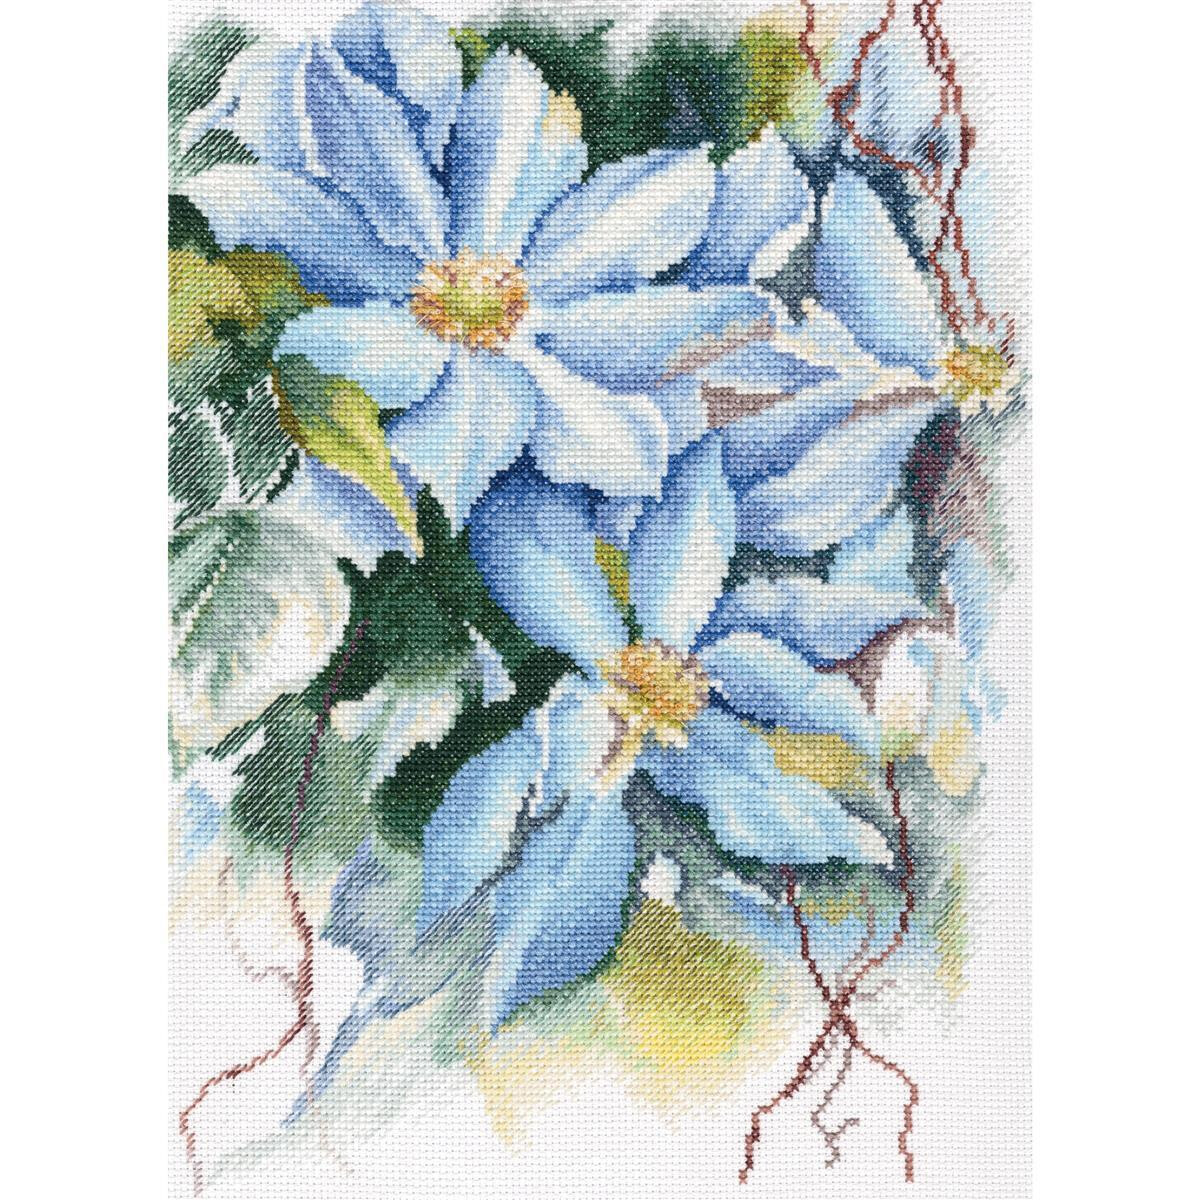 RTO counted Cross Stitch Kit "Blue clematis"...